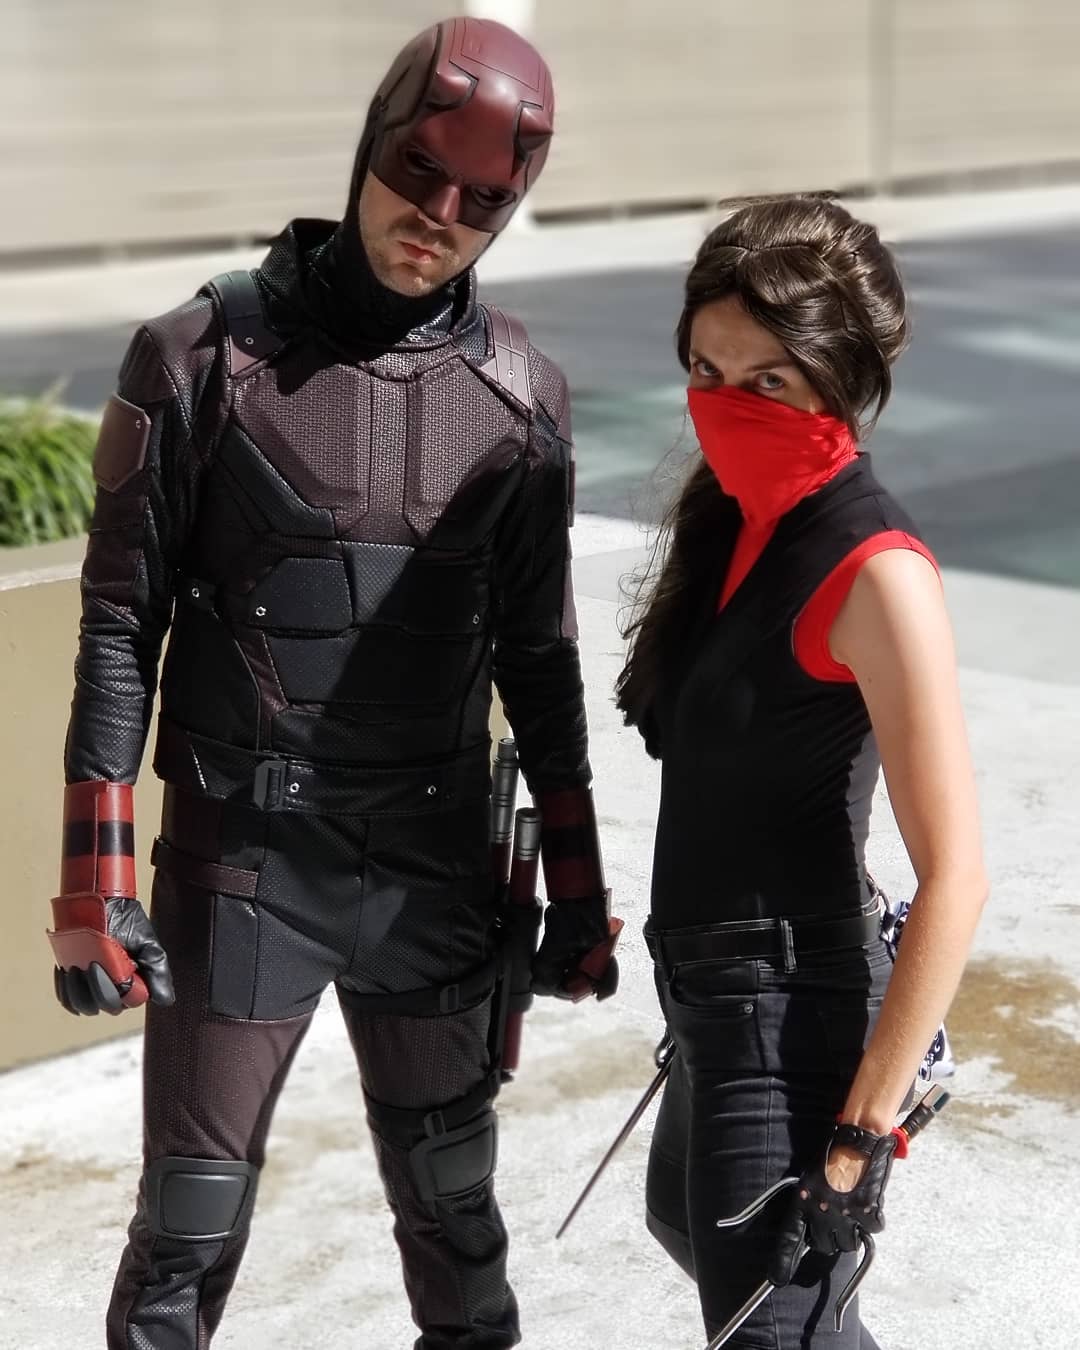 Netflix Daredevil Season 2 Red Suit -- Completed Project | RPF Costume and  Prop Maker Community